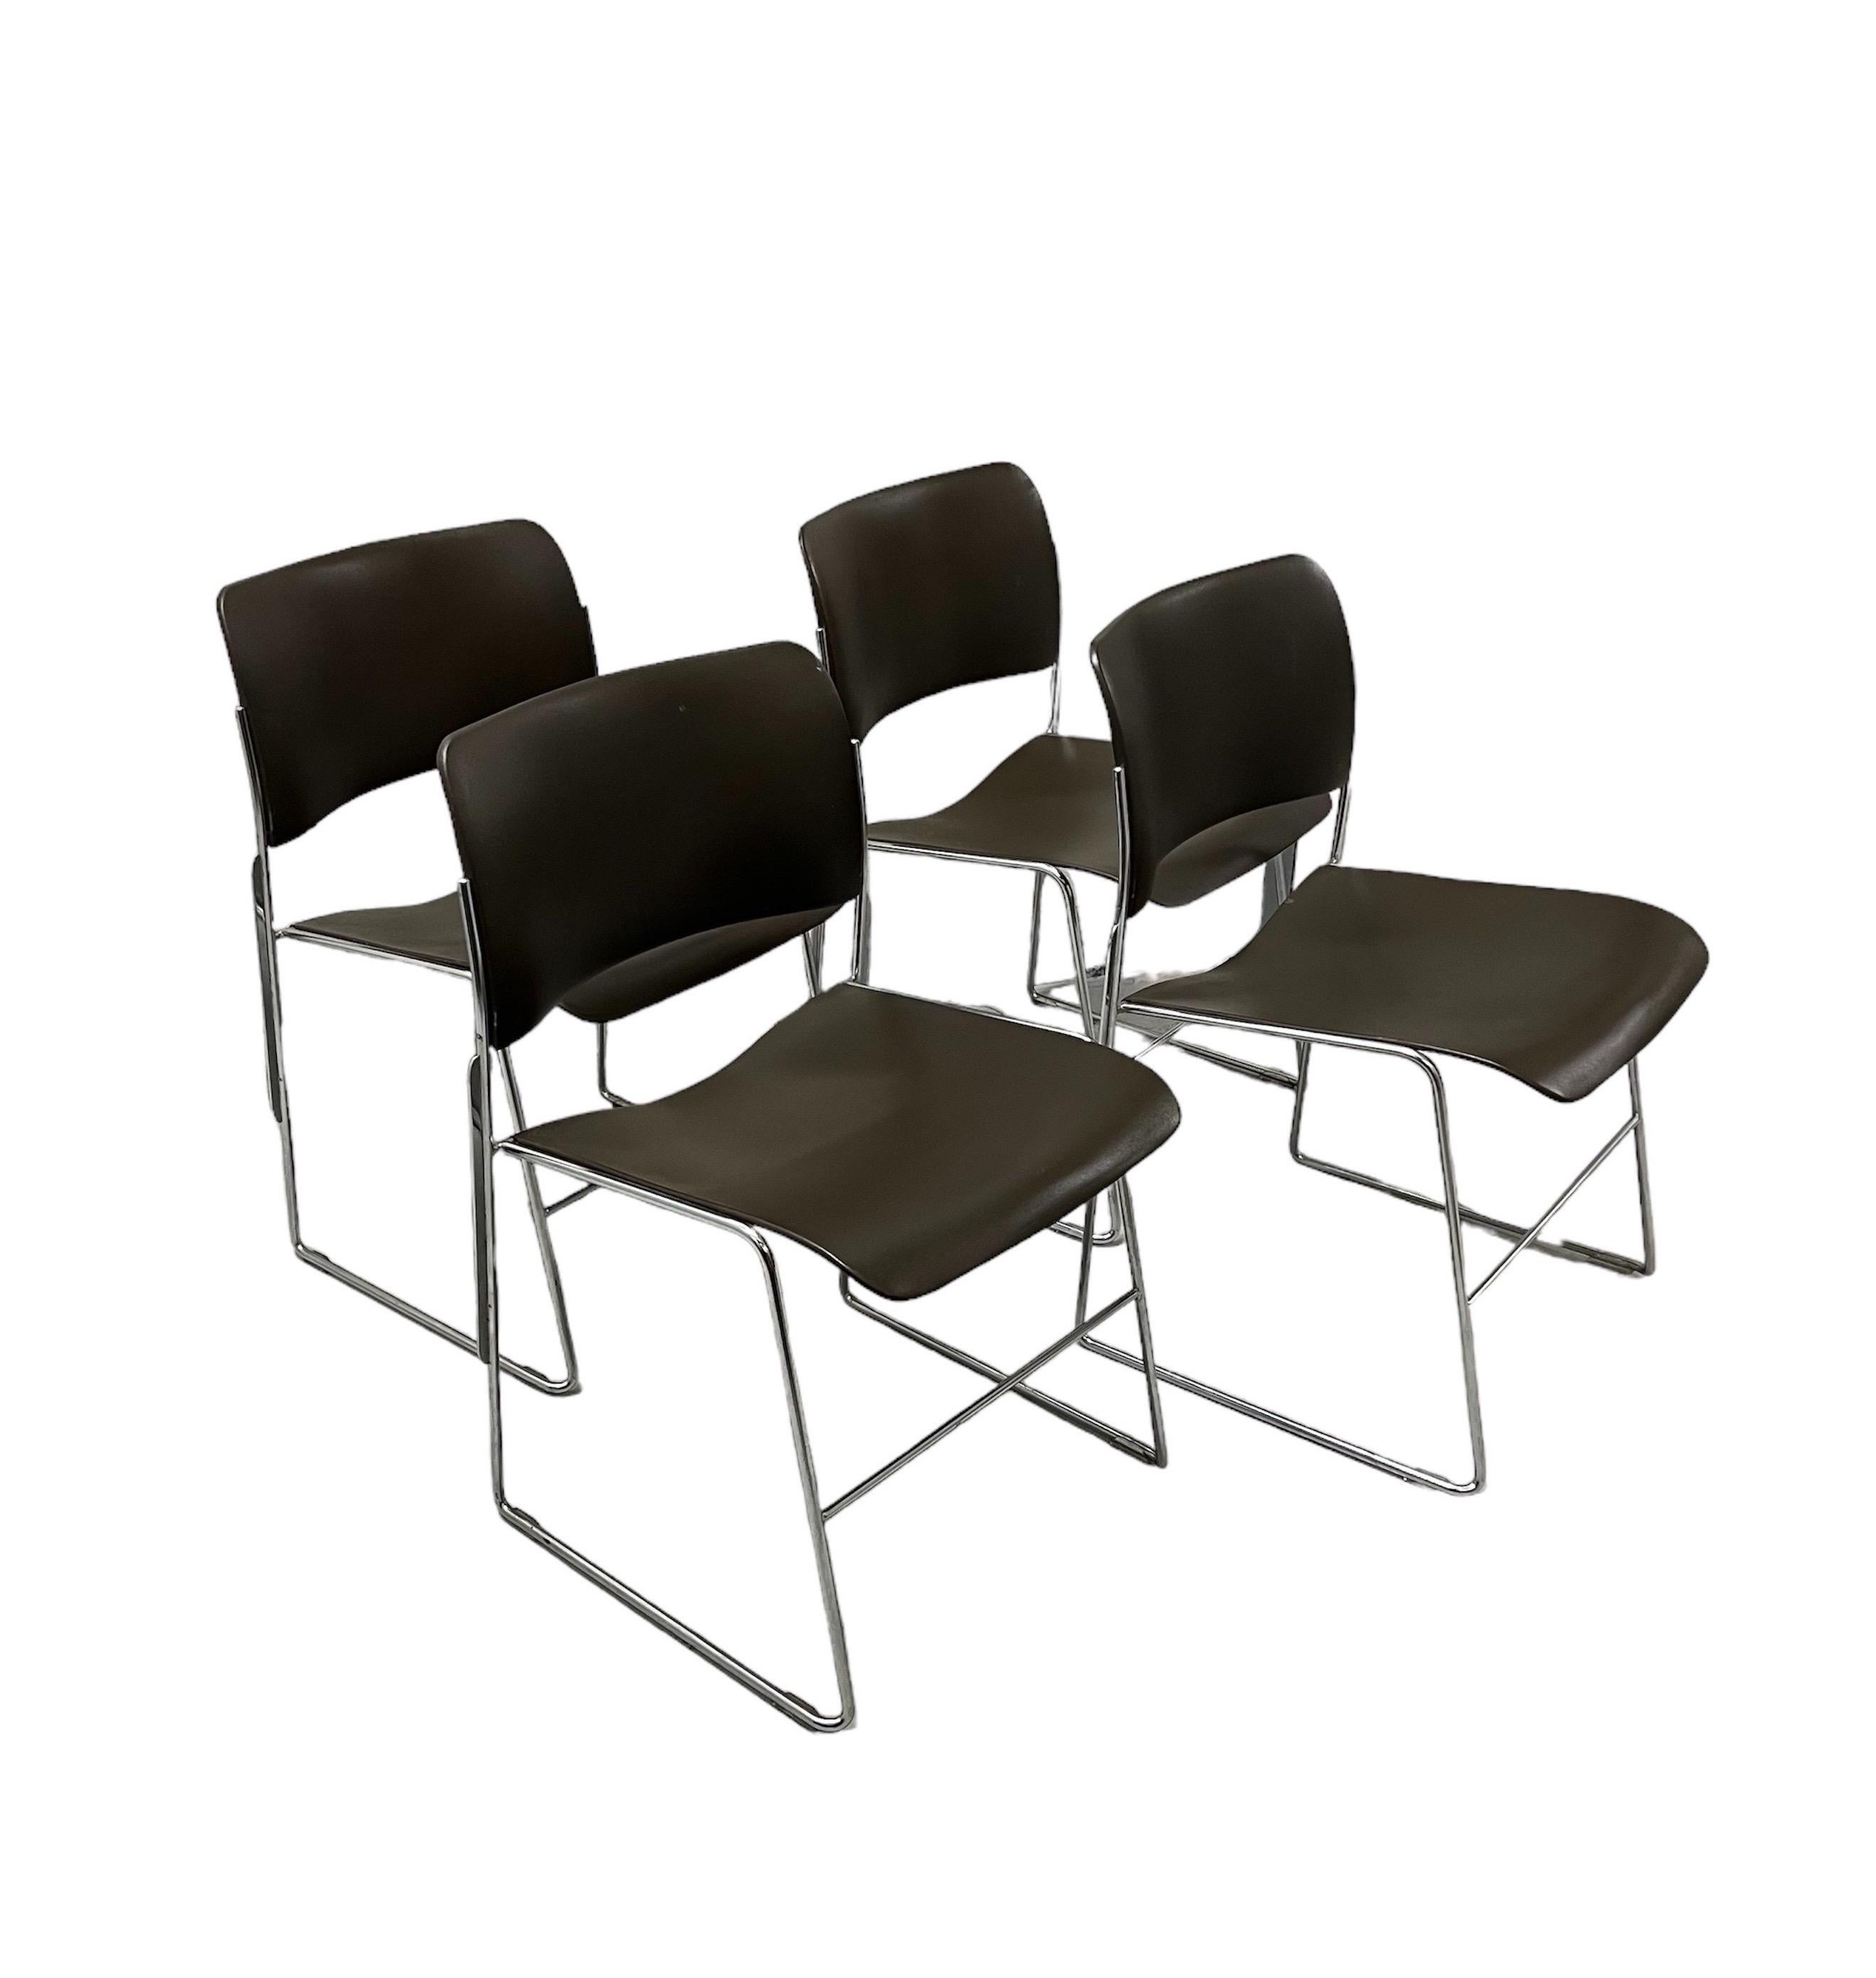 Set of 4 Stackable 40/4 Chairs By David Rowland in Dark Brown
Recognized as the first stackable chair, the 40/4 Chair is a feat of Design, elegance and ergonomics; encompassing the full range of multi-function that has come to challenge modernist